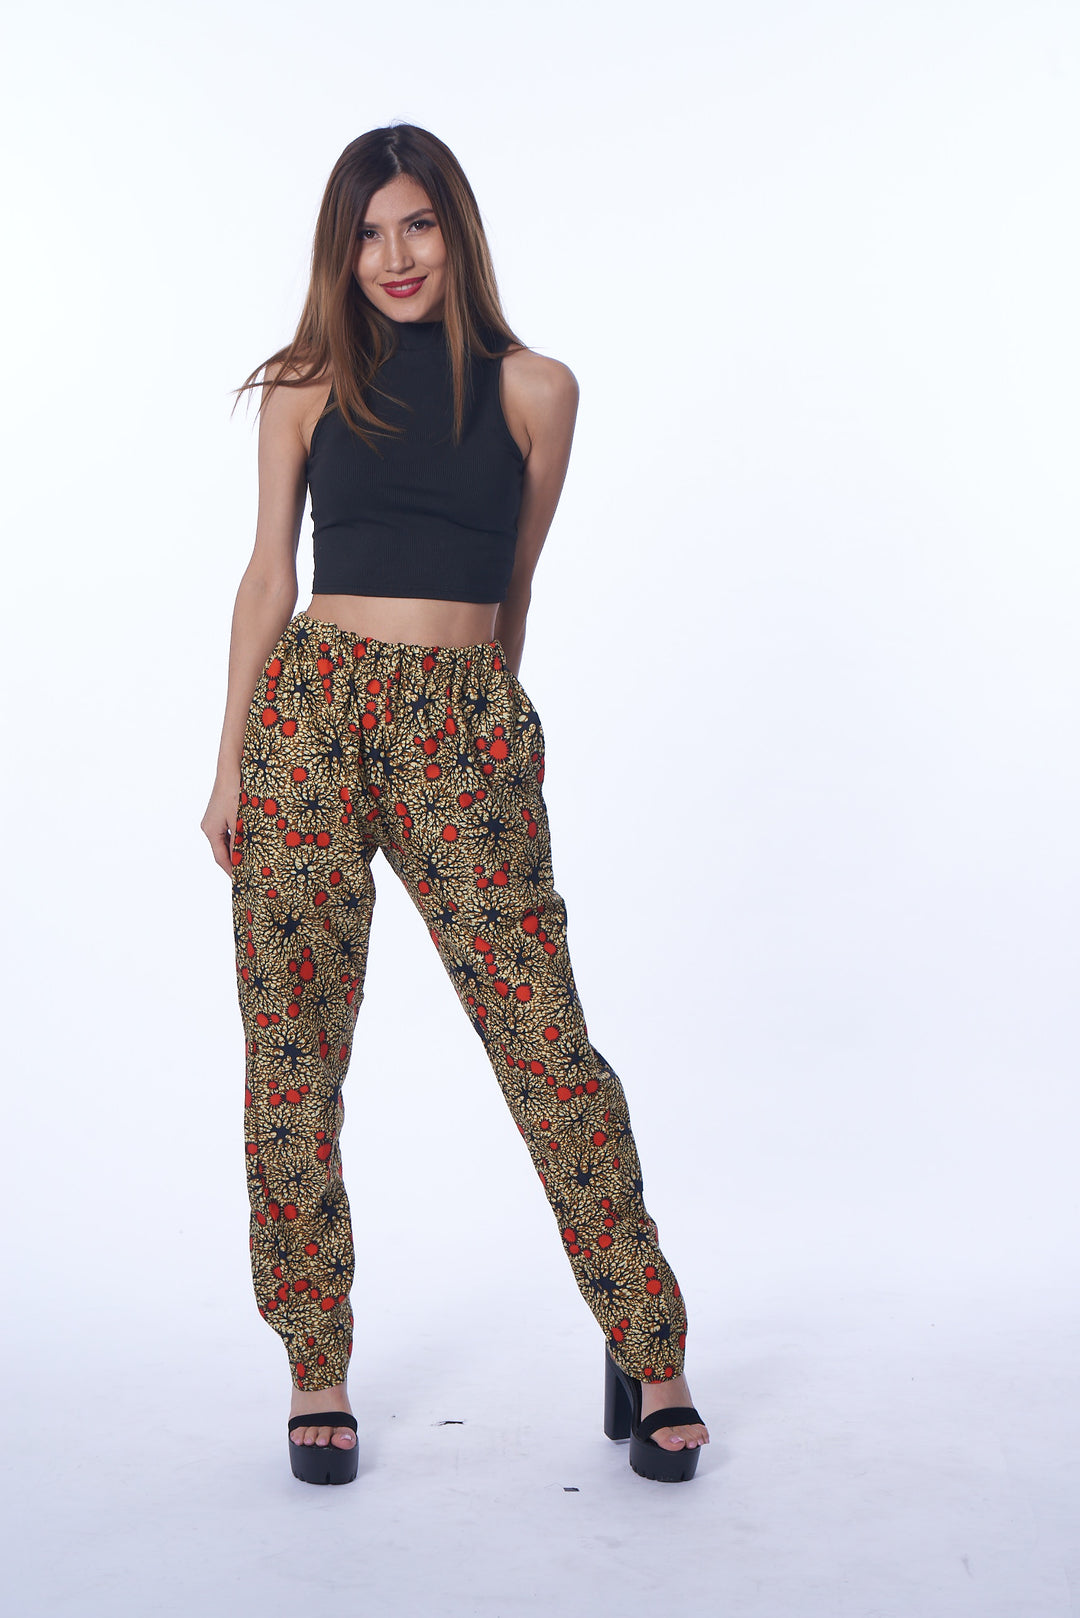  A photo of a woman wearing myObioma’s Ameena Pants. These beige harem pants feature an elastic waist and ankle design that keeps the pants in position above the waist. The wide leg feature emphasizes the legs, especially with the brown and orange circle patterns scattered throughout the print.